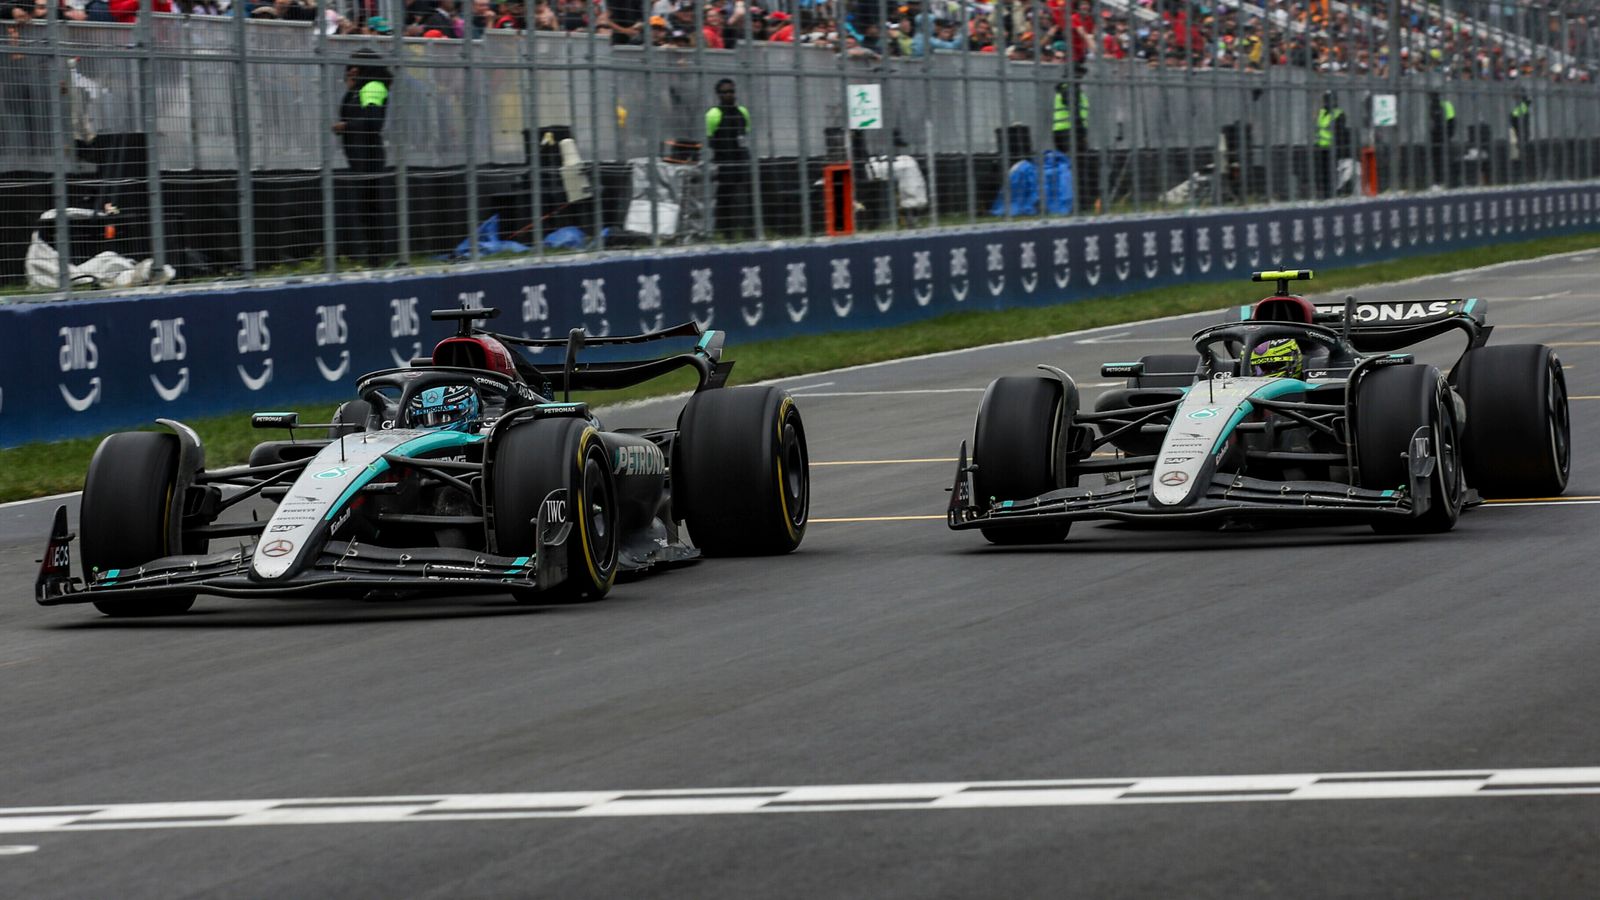 Mercedes not expecting to be 'right at front' in Barcelona